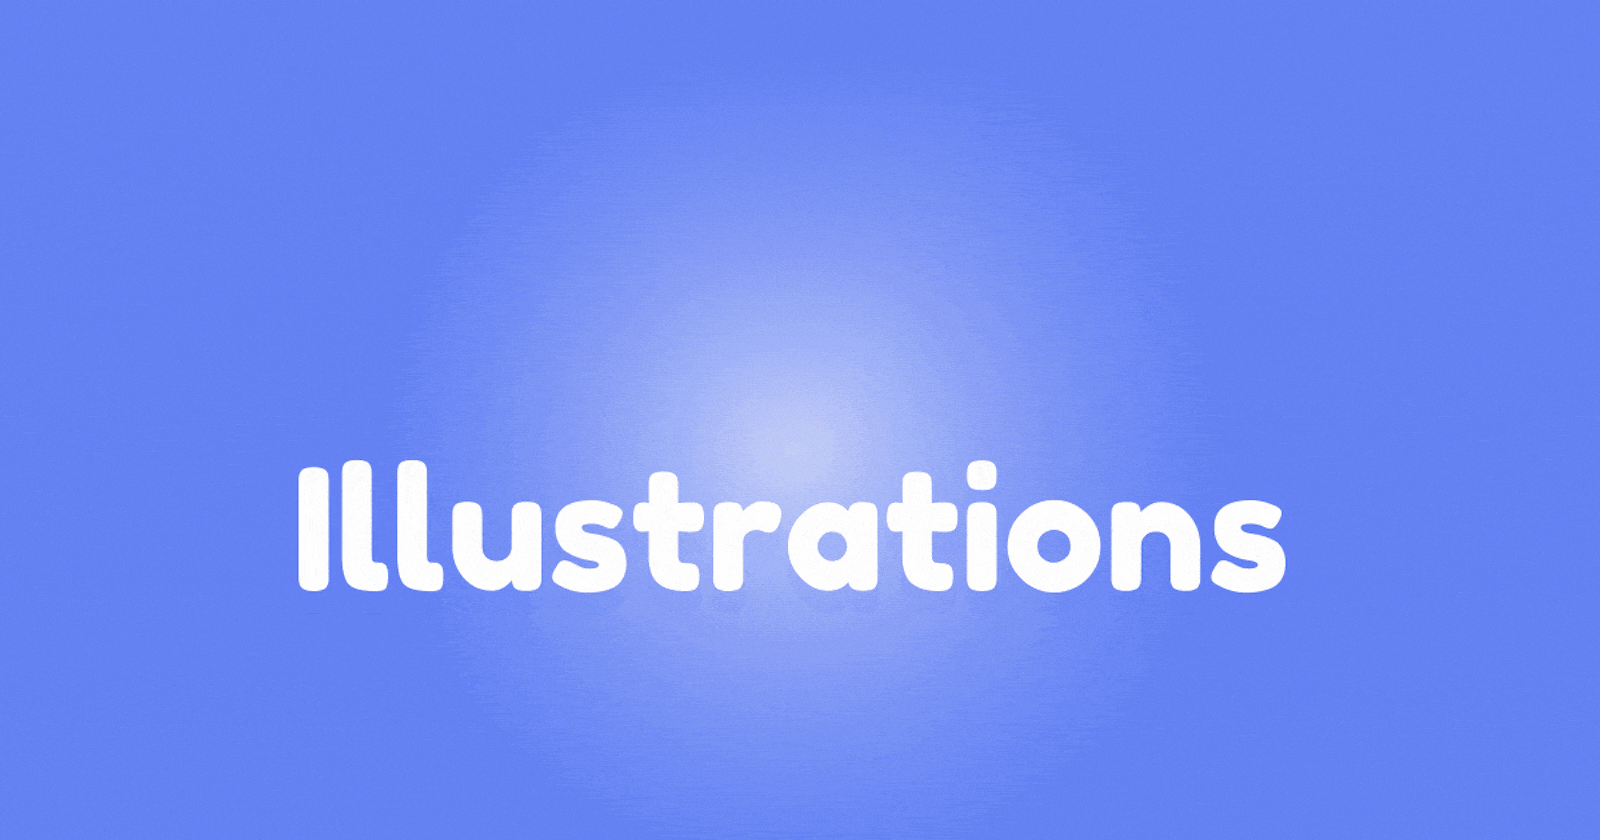 Free Illustration Resources for your next project!